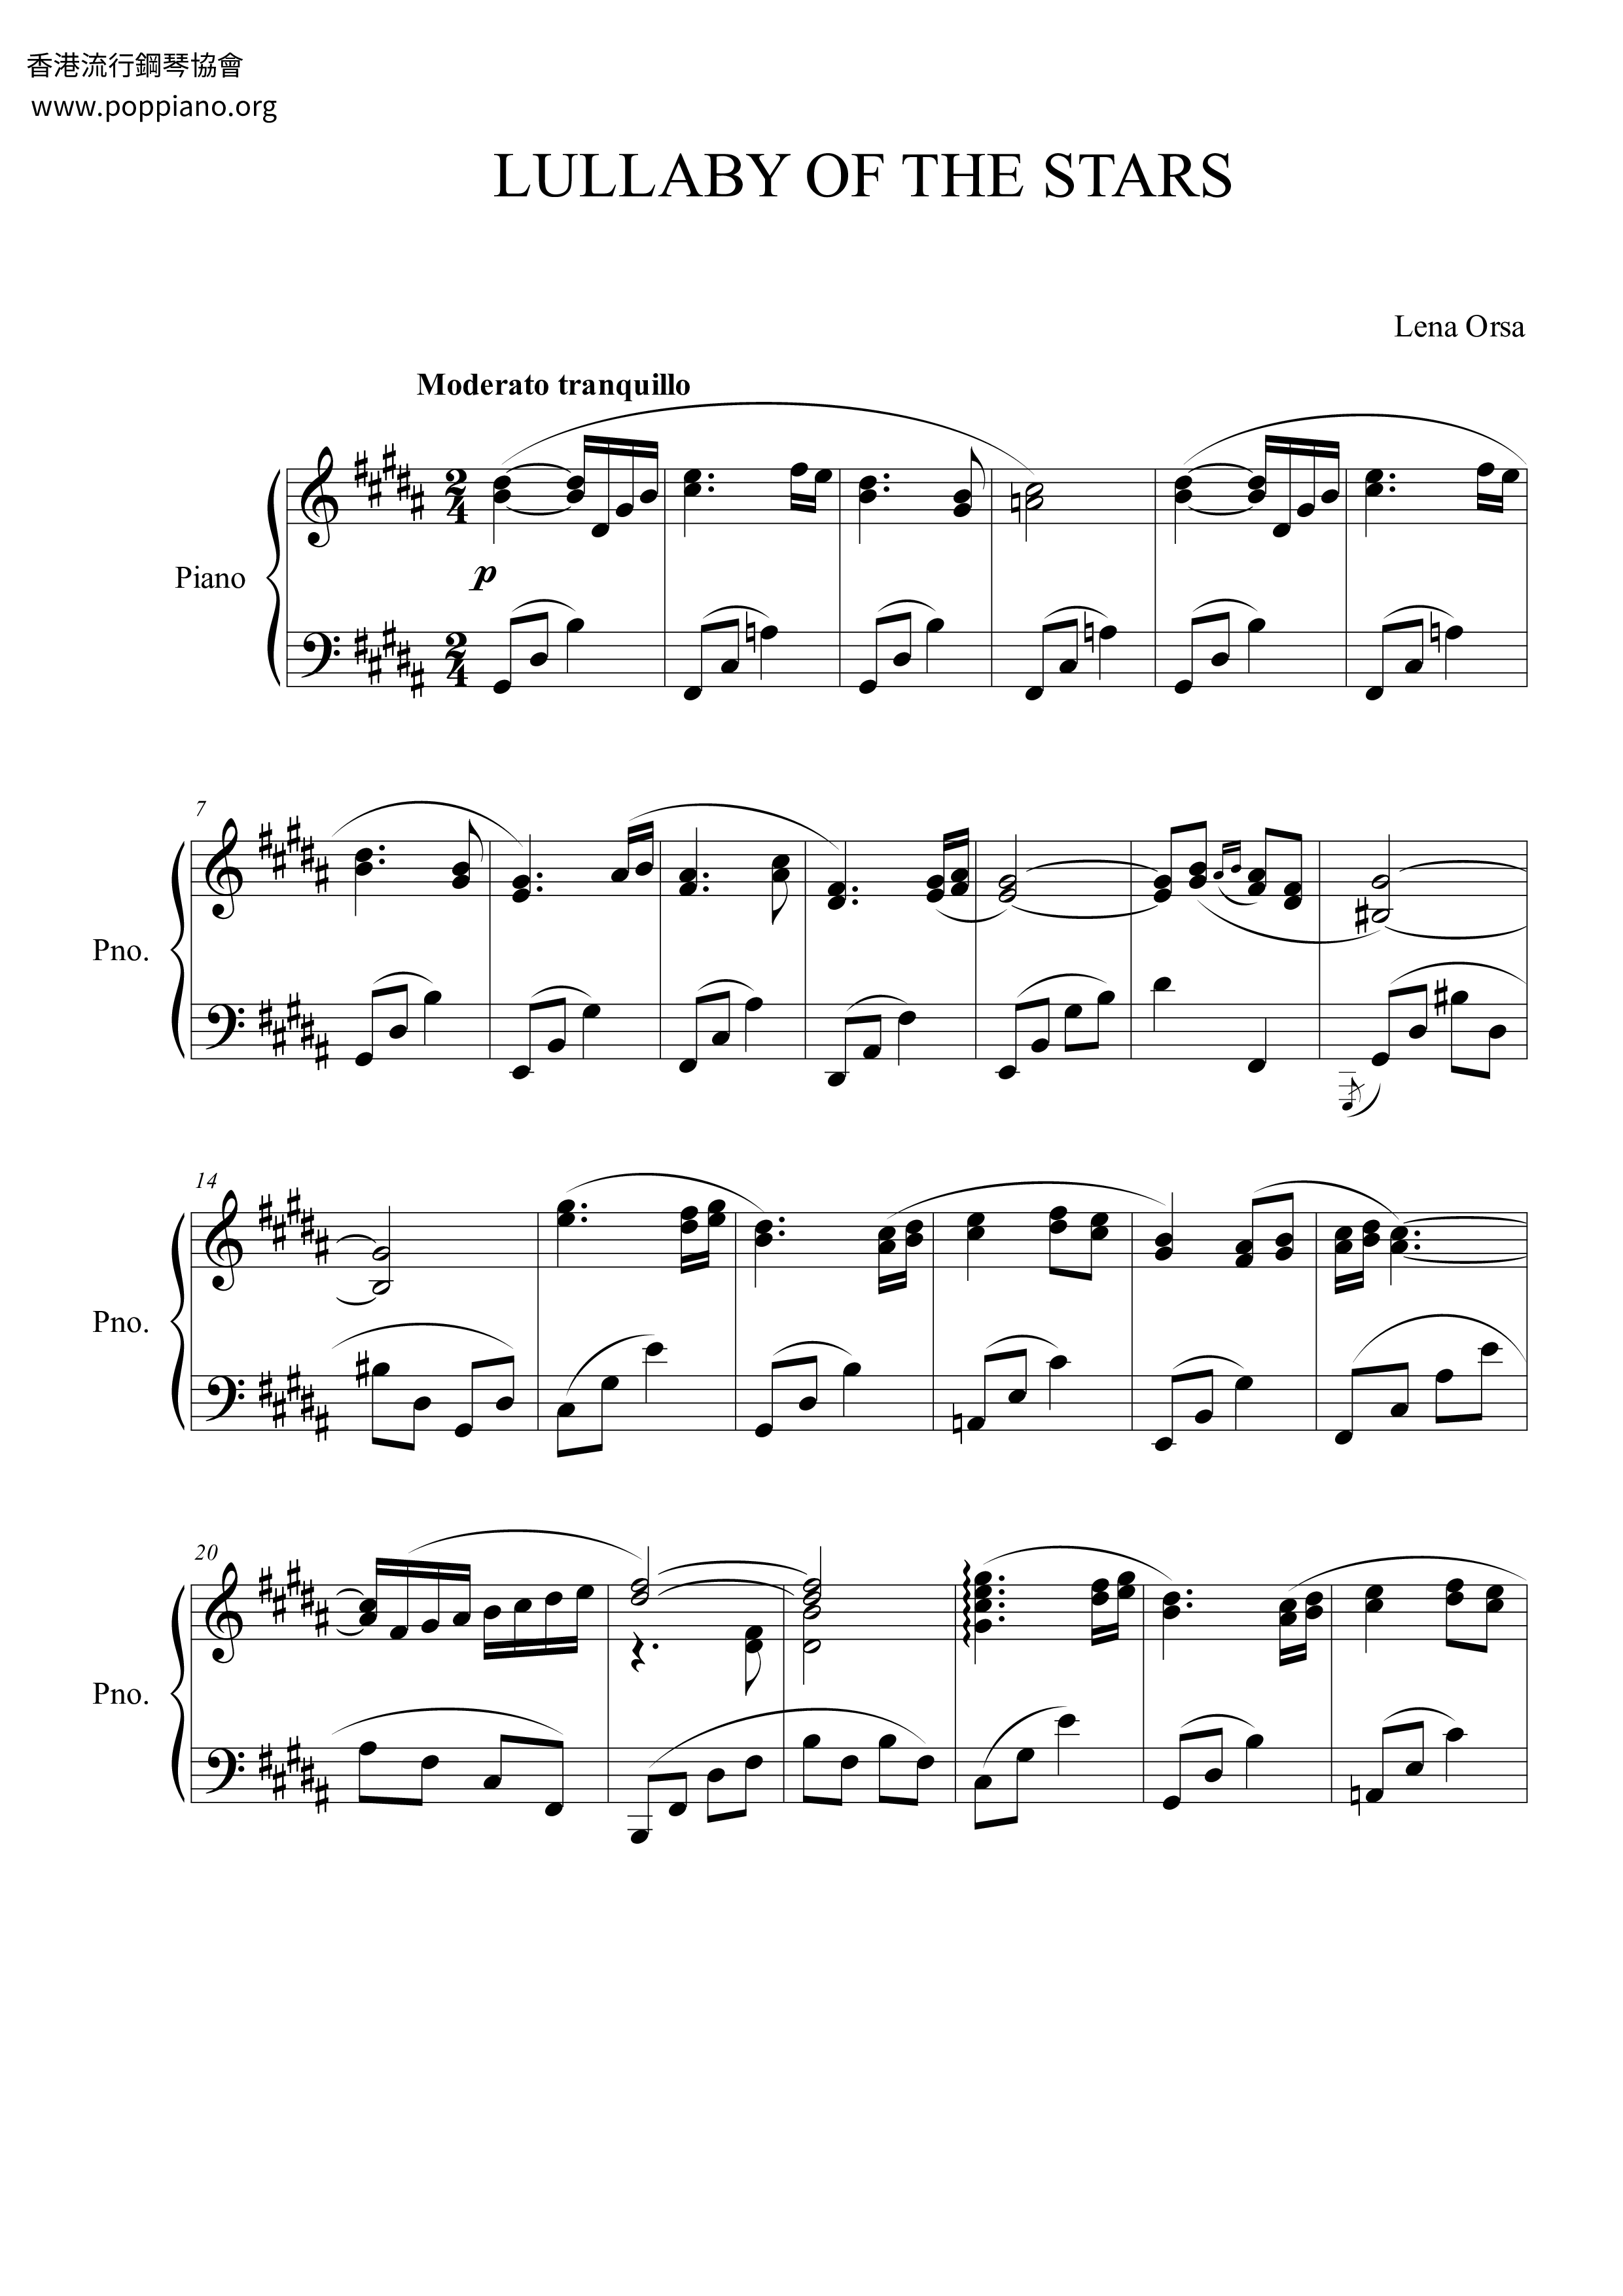 Lullaby Of The Stars Score